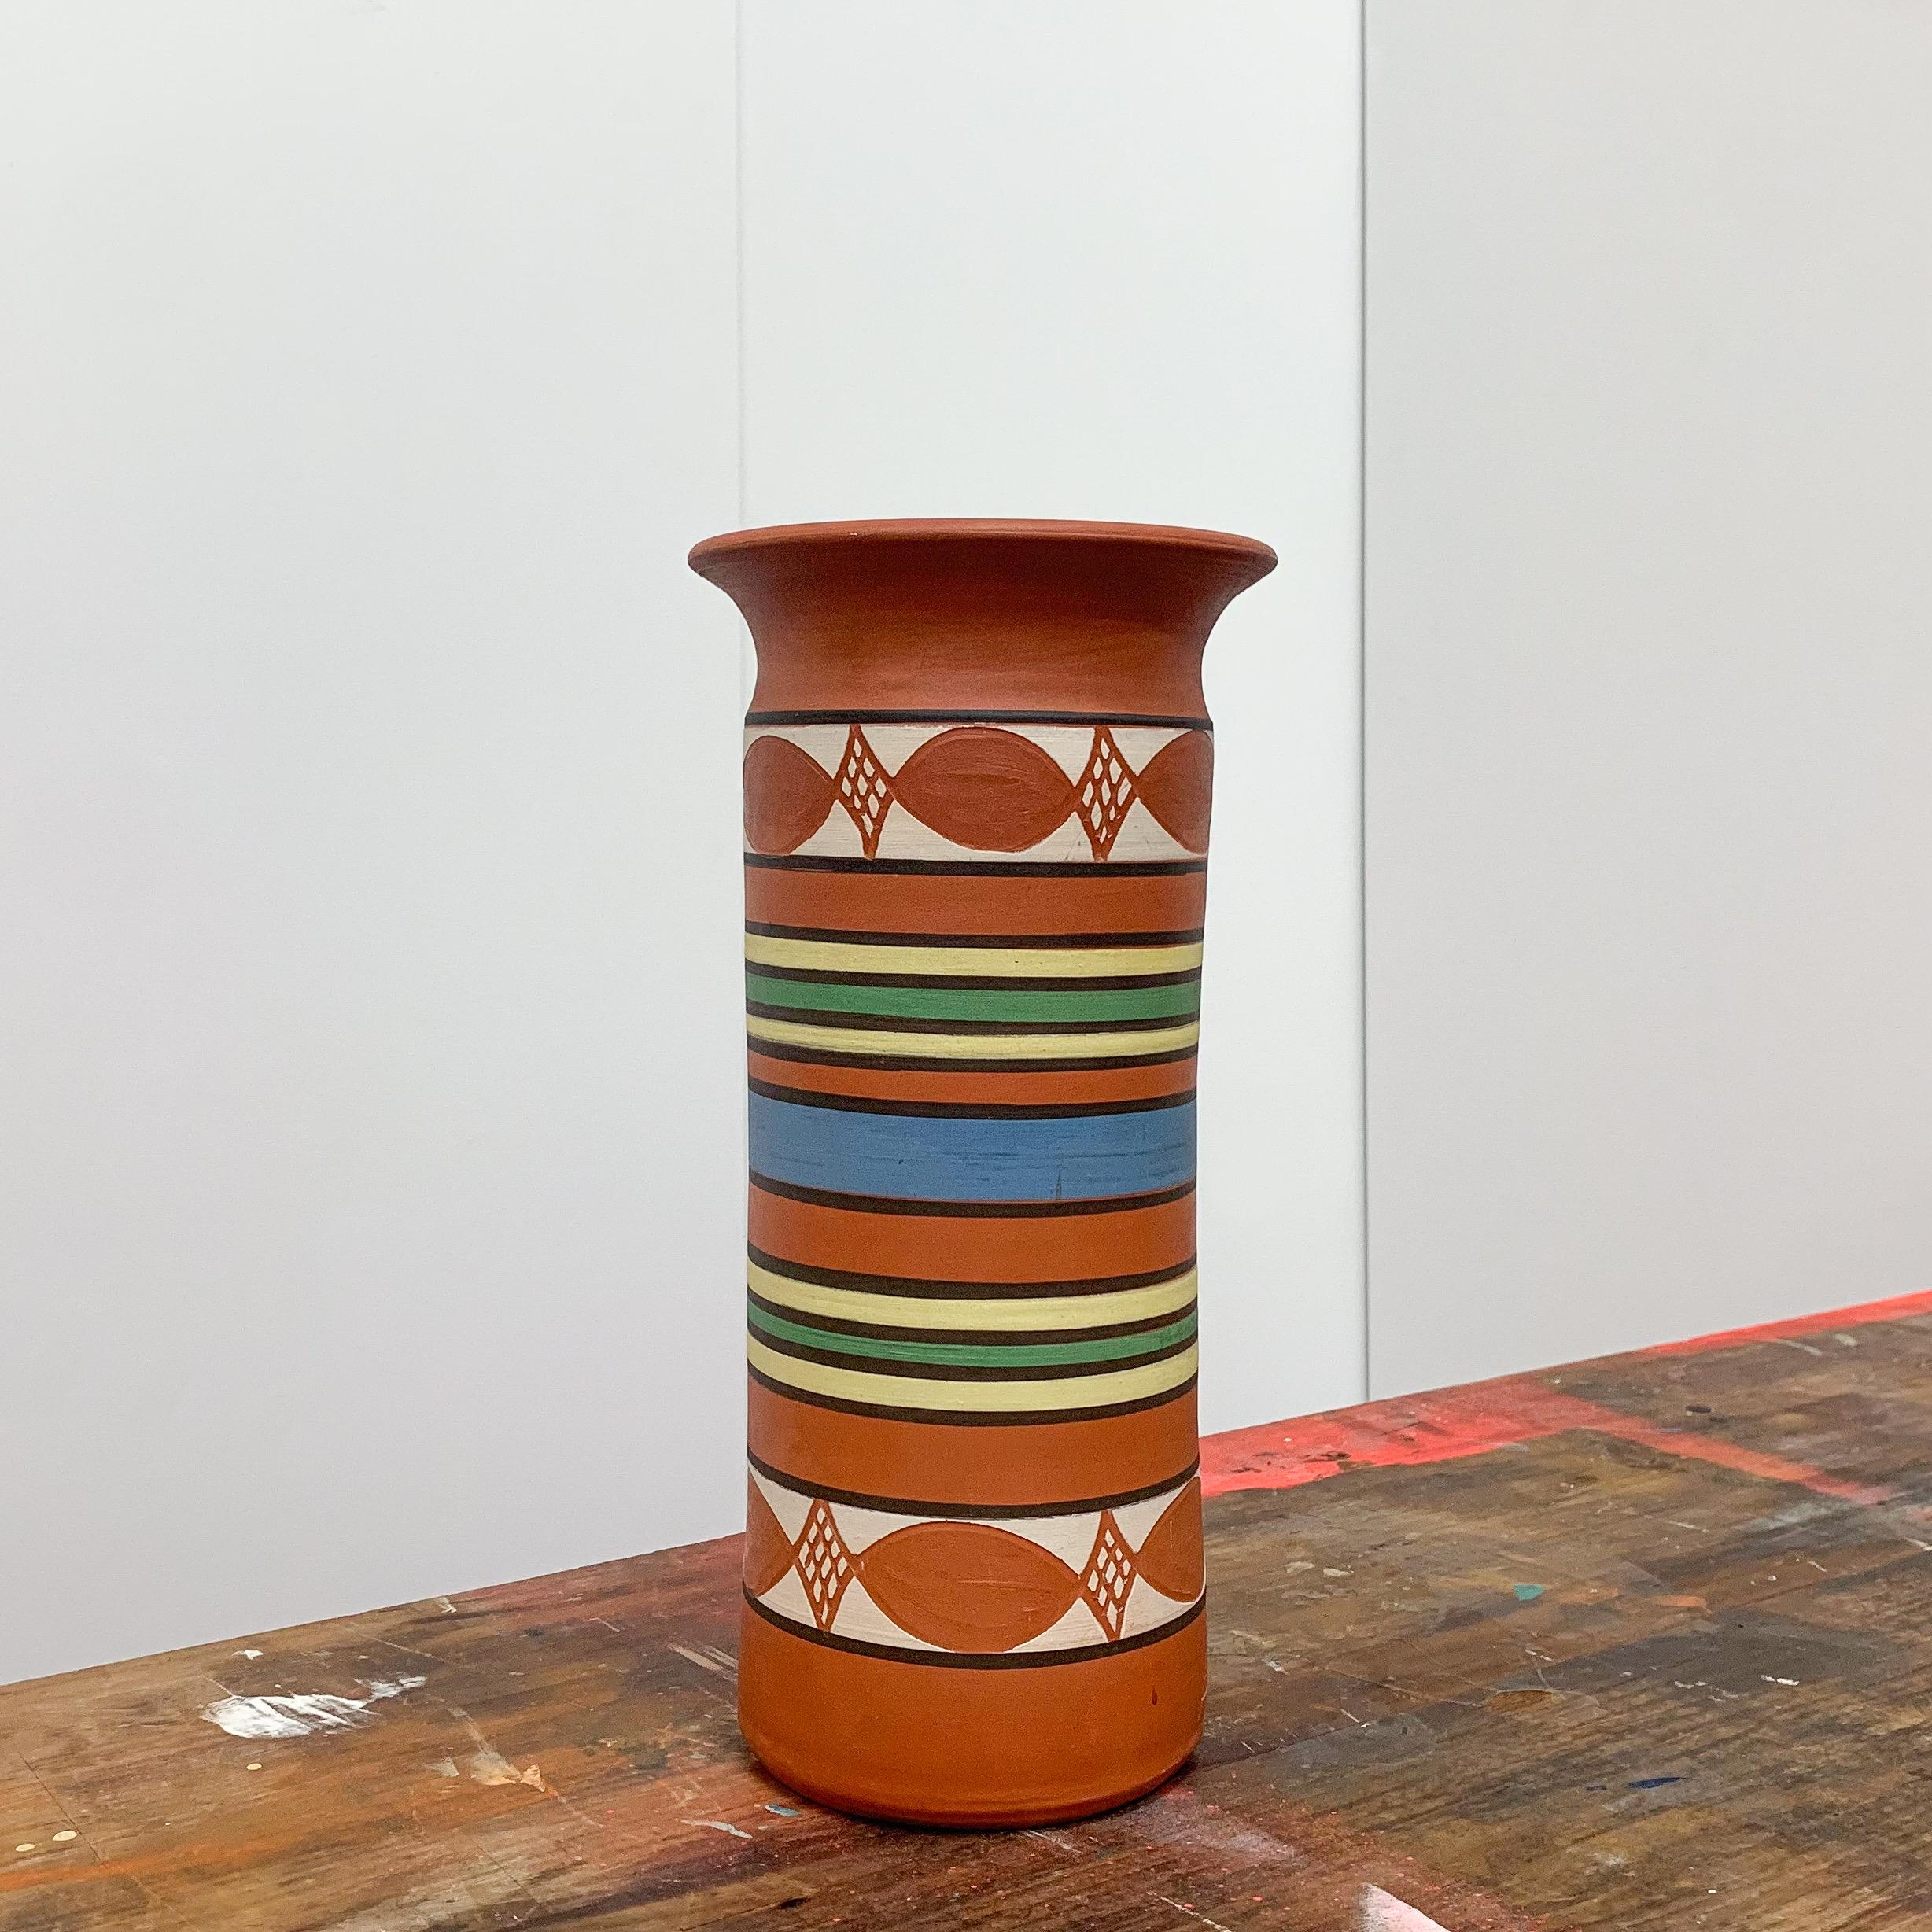 Painted cylindrical signed terracotta vase - French, c1960s.

Signed, but unidentified.